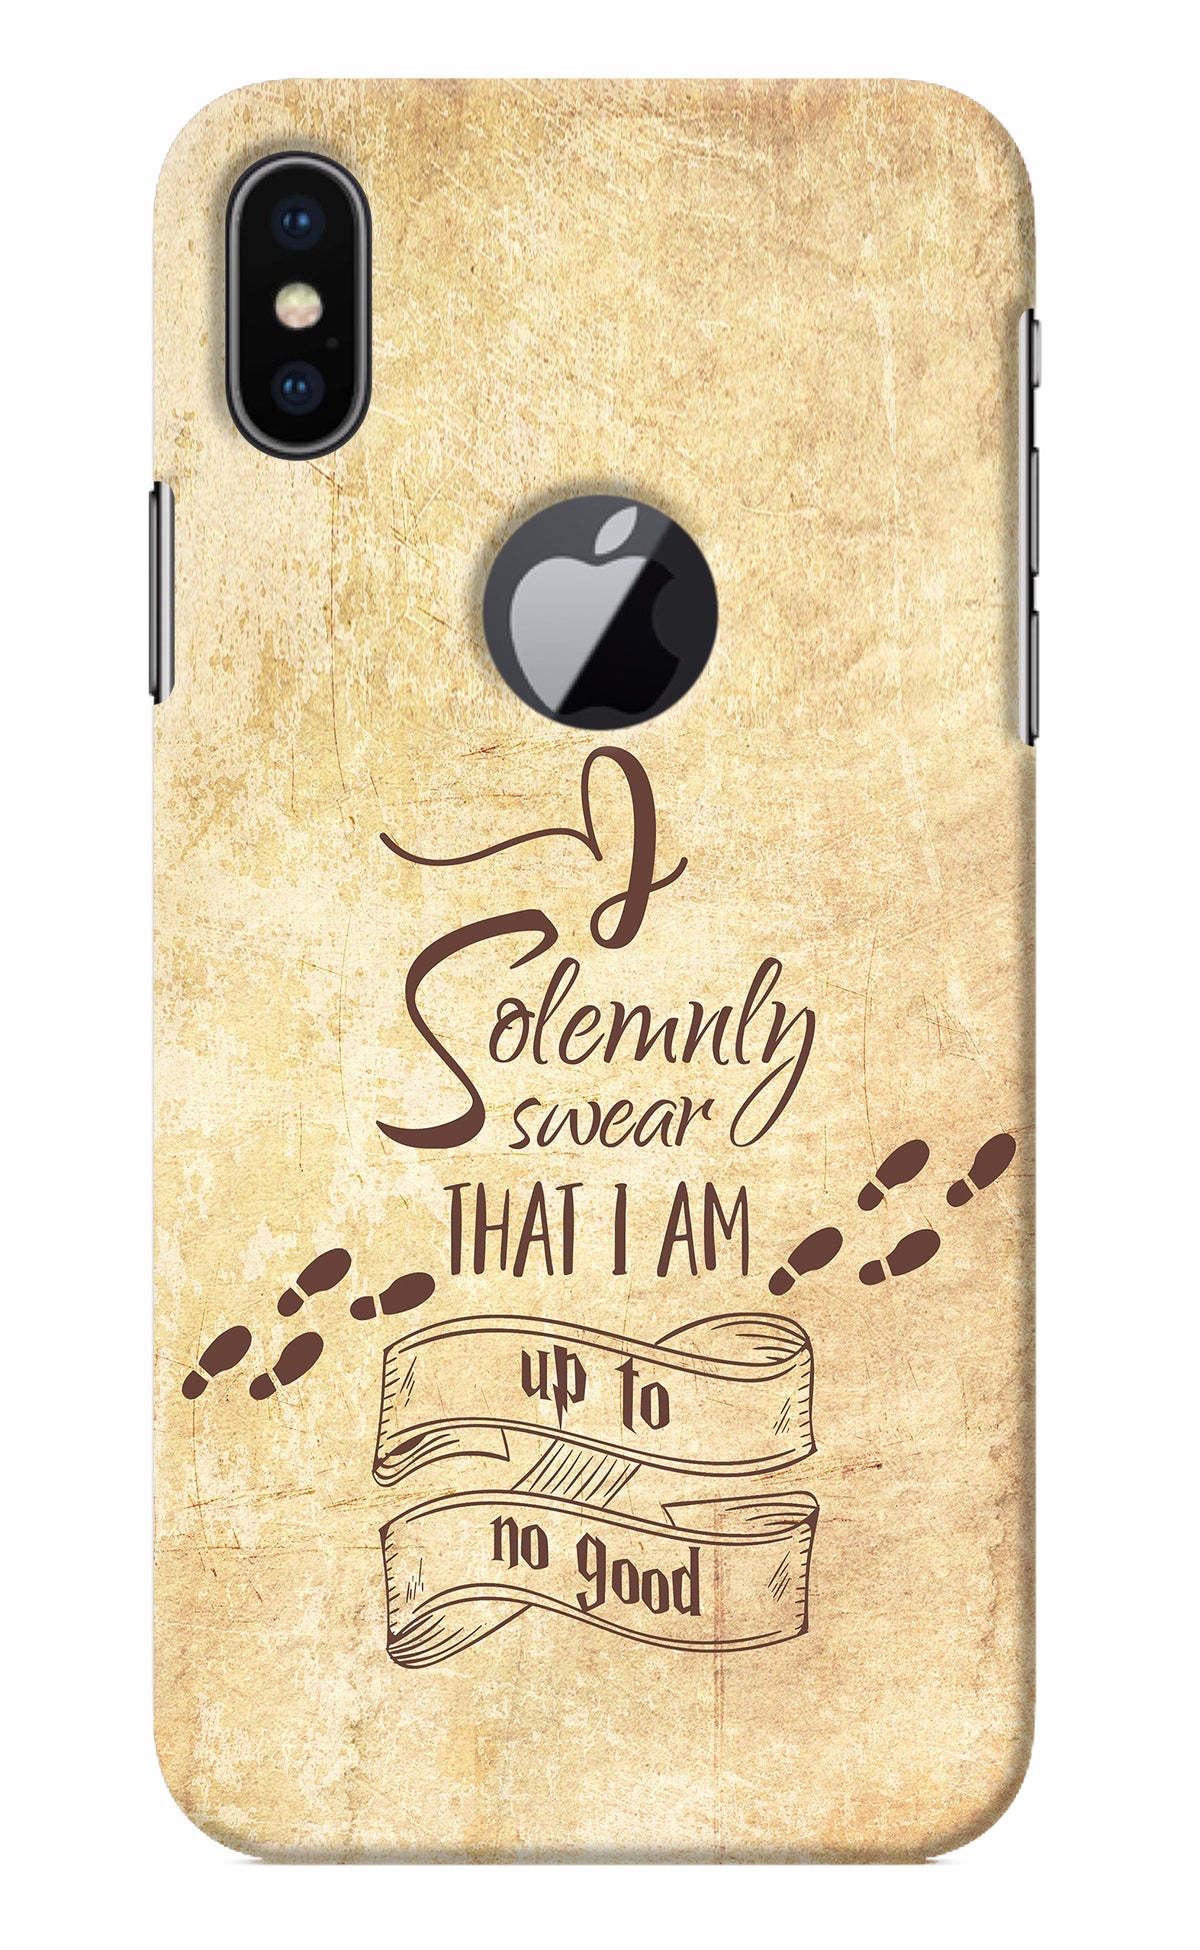 I Solemnly swear that i up to no good iPhone X Logocut Back Cover